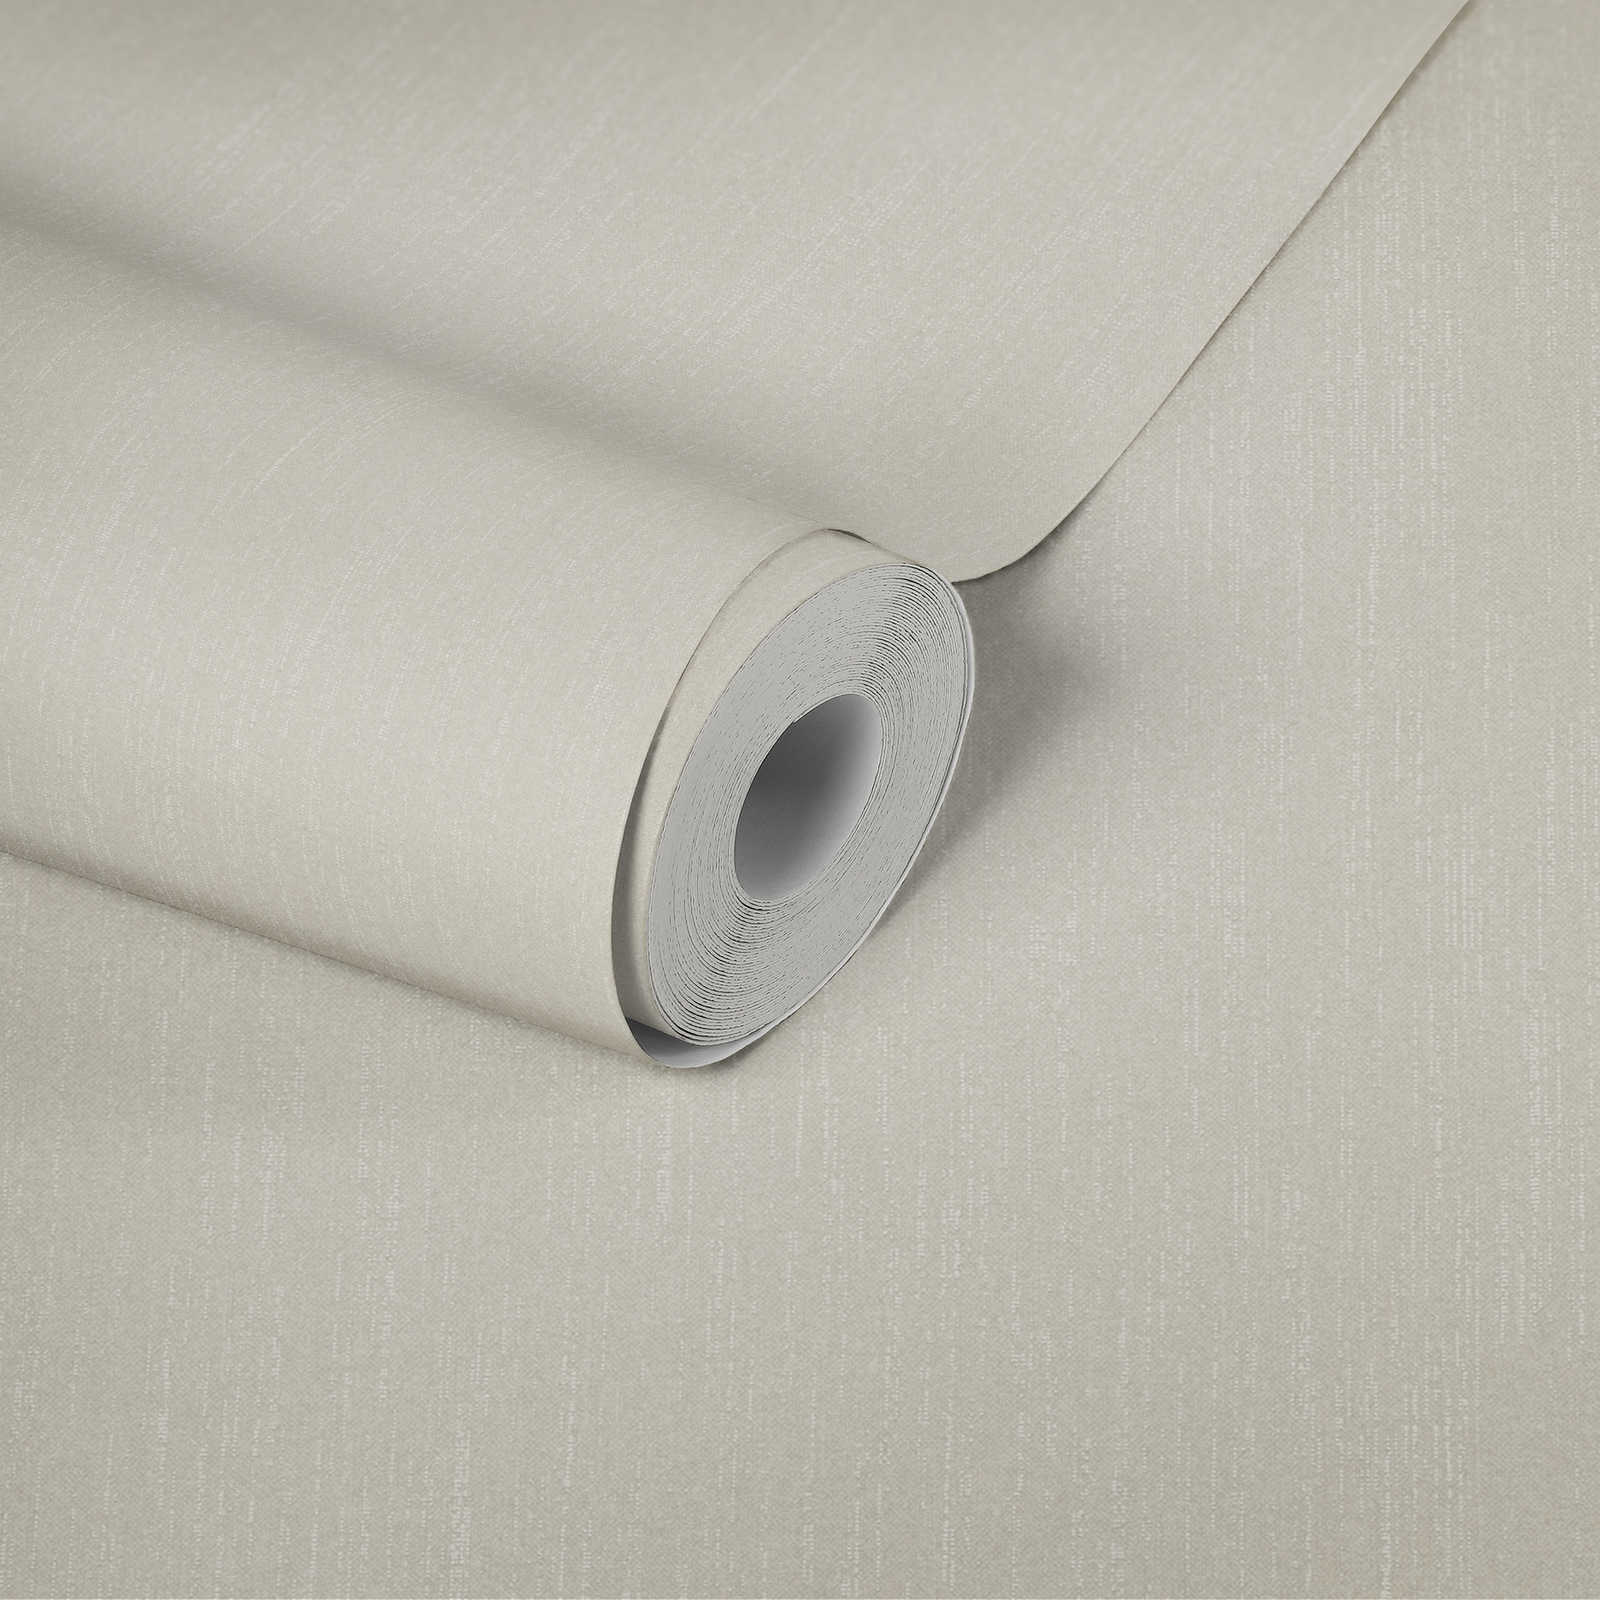             Bright non-woven wallpaper with textile look & shimmer finish - white
        